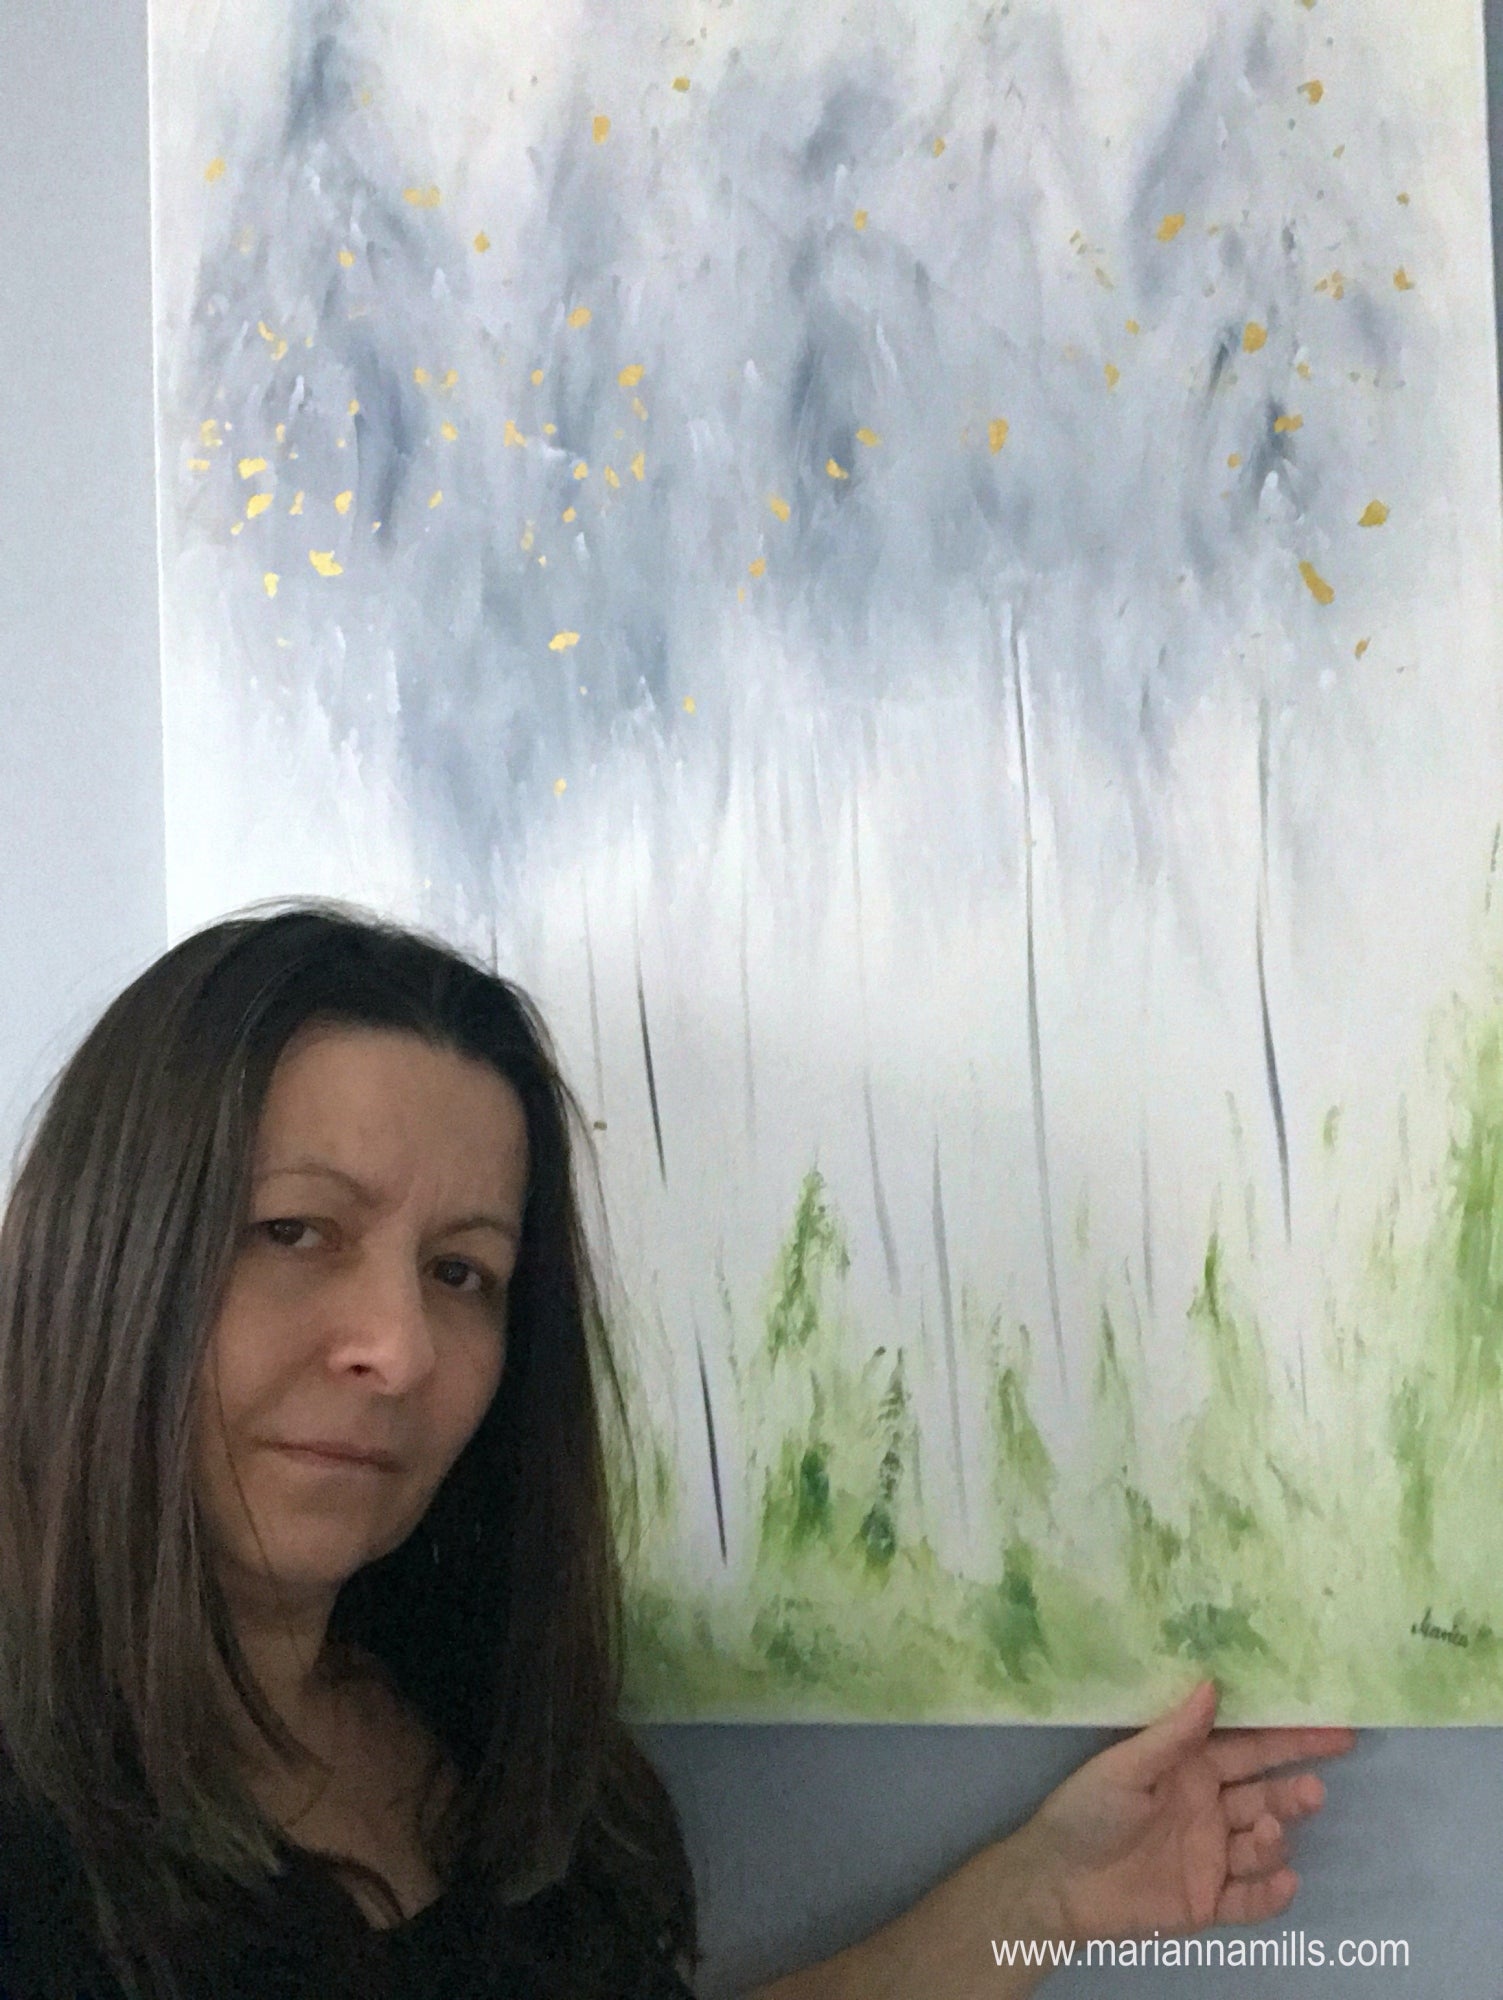 original surreal oil painting with 22k gold leaves by Marianna Mills, Hungarian artist. title is The first of Phoenix and it featuring gray trees with white background and fresh green grass. Marianna the artist took a selfie in front of her painting.